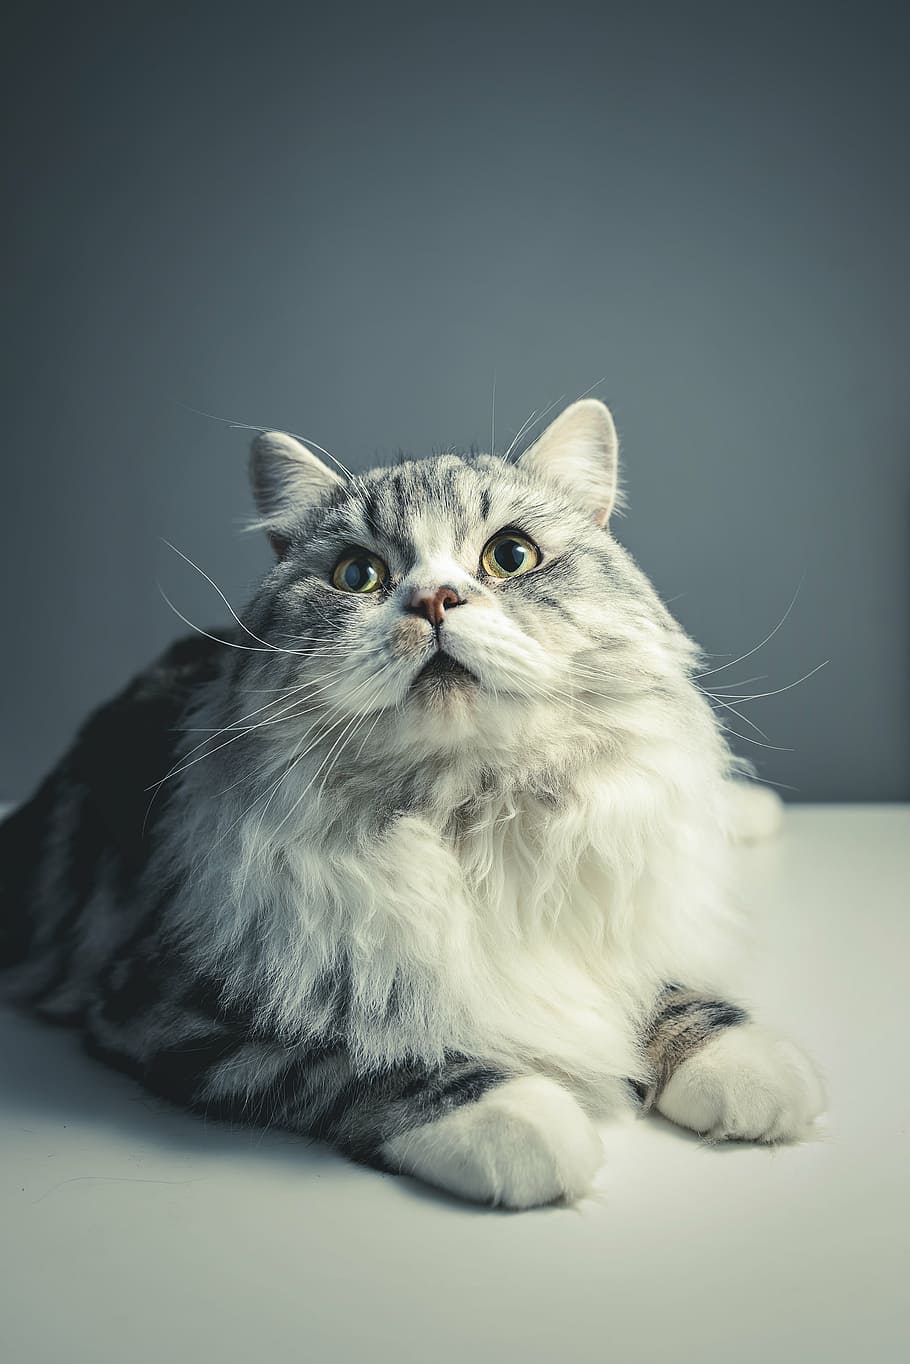 long-coated gray cat, cat, persian breed, black grey, pets, domestic cat, domestic animals, maine coon cat, feline, animal themes